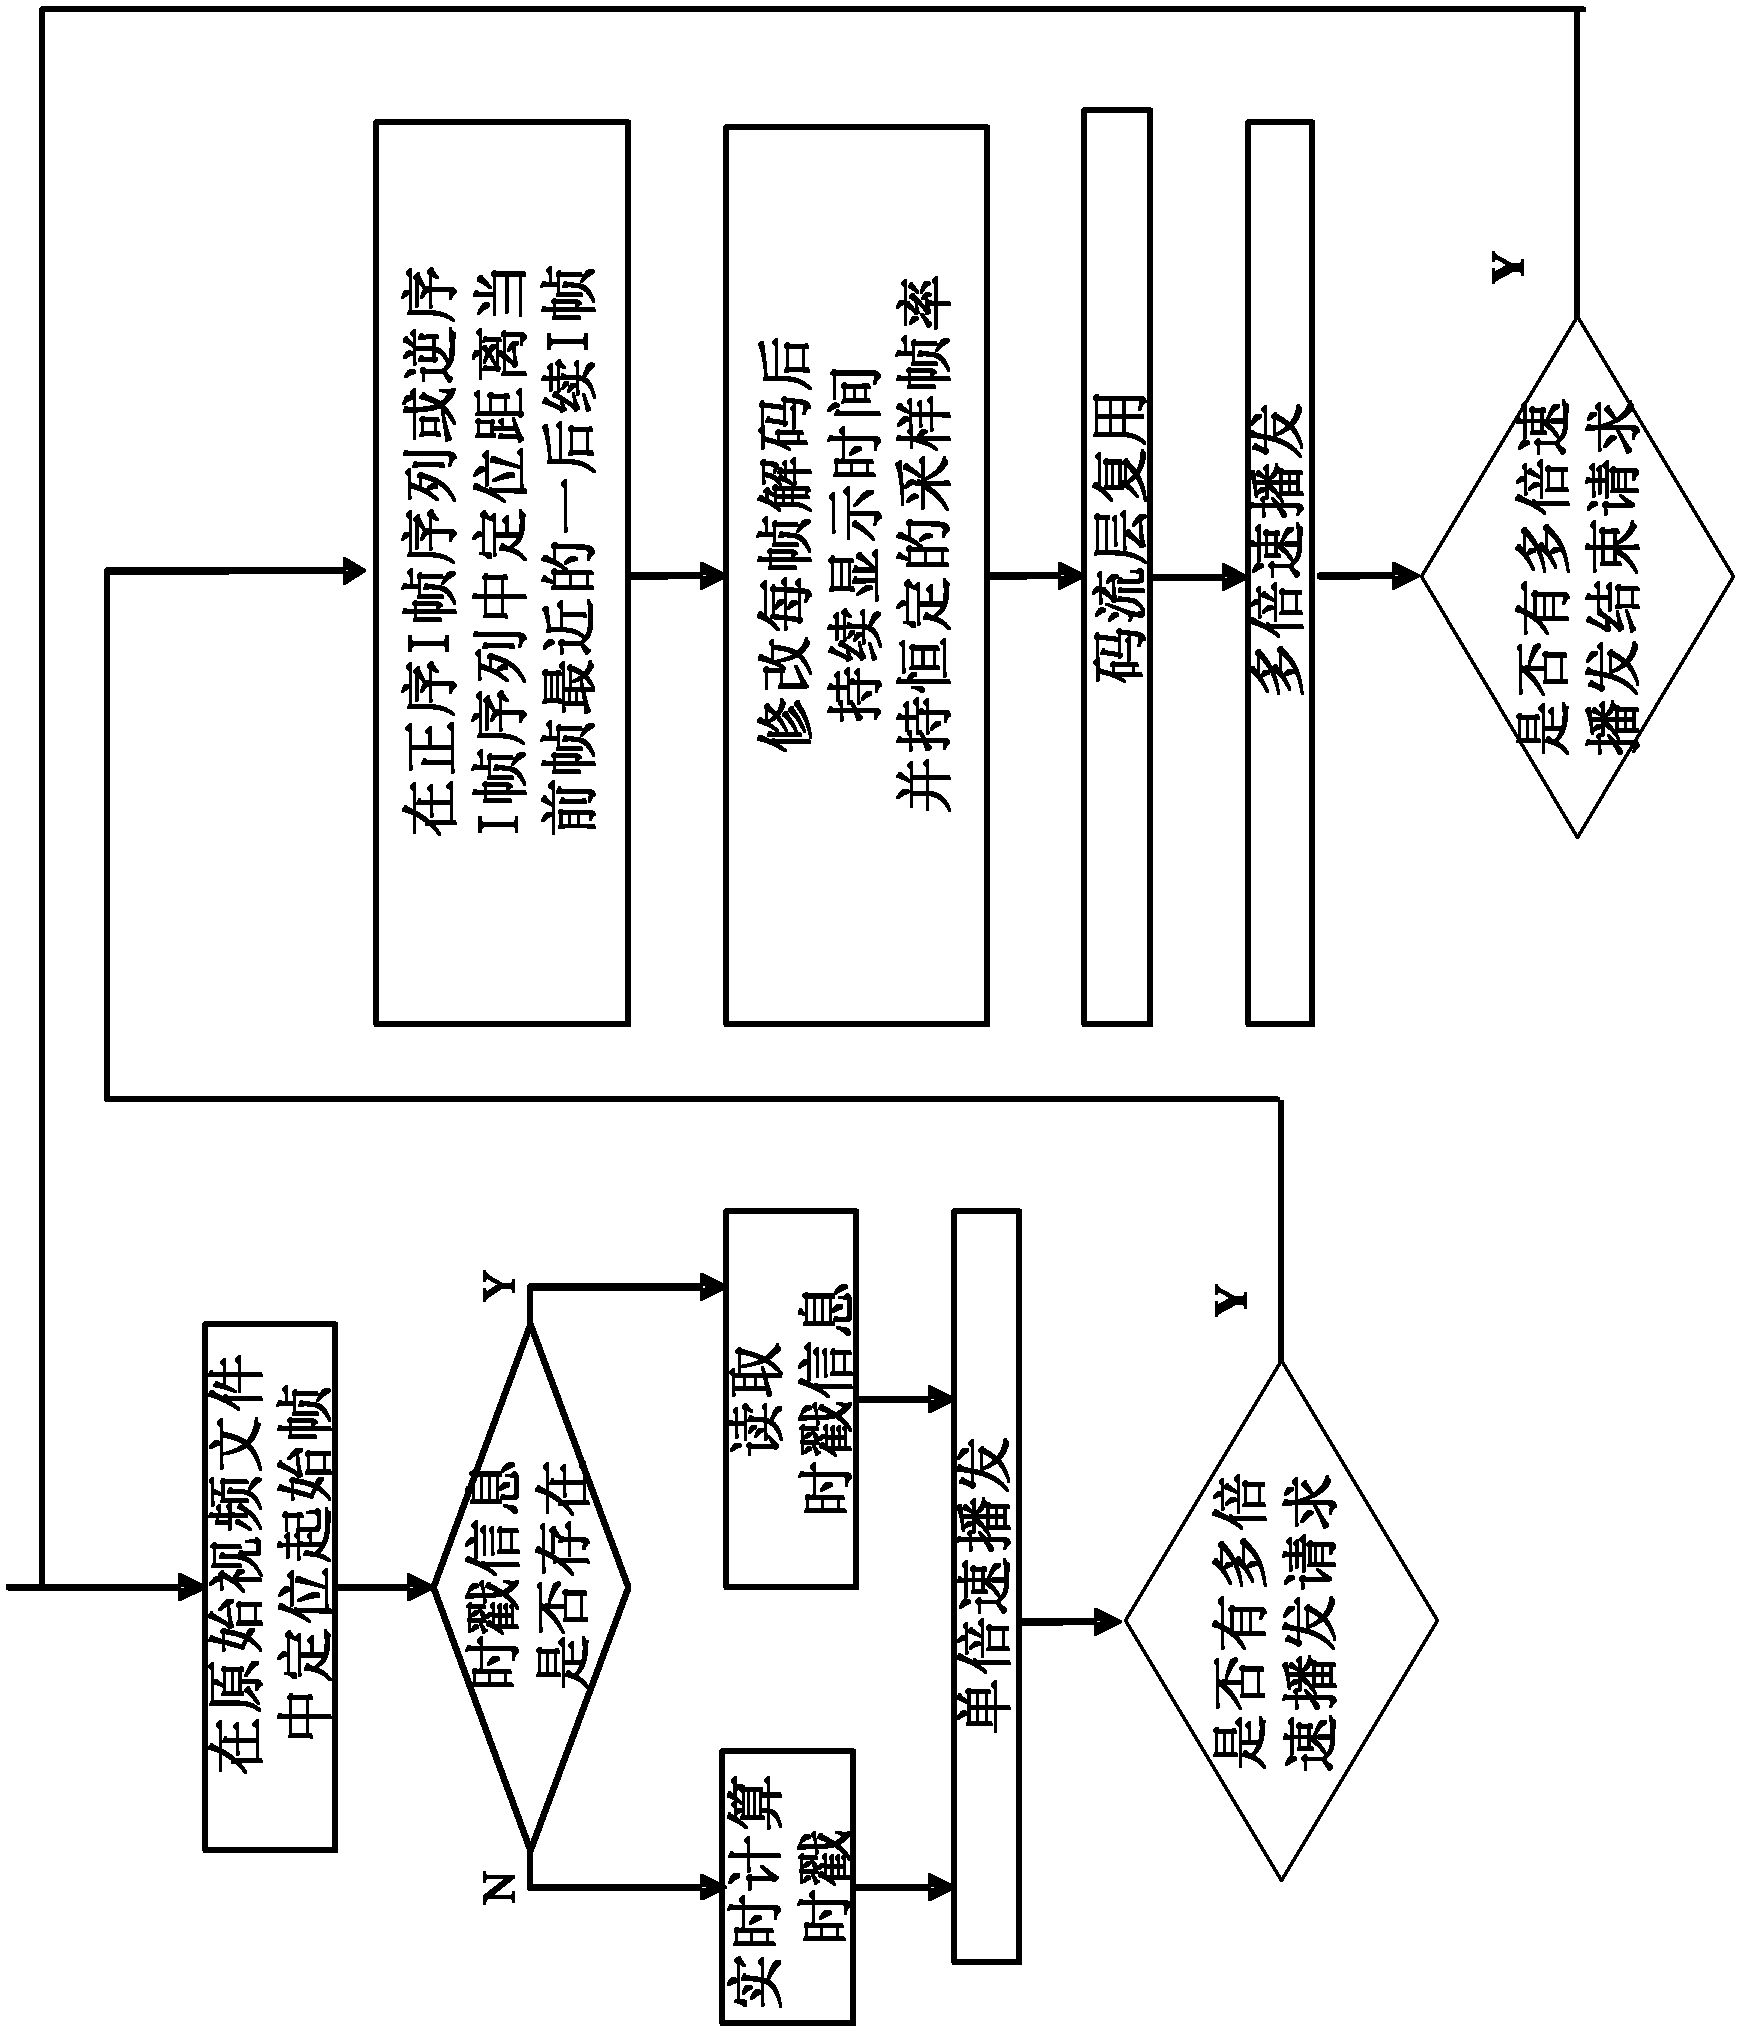 Multimedia data processing method and processing system suitable for digital media broadcast